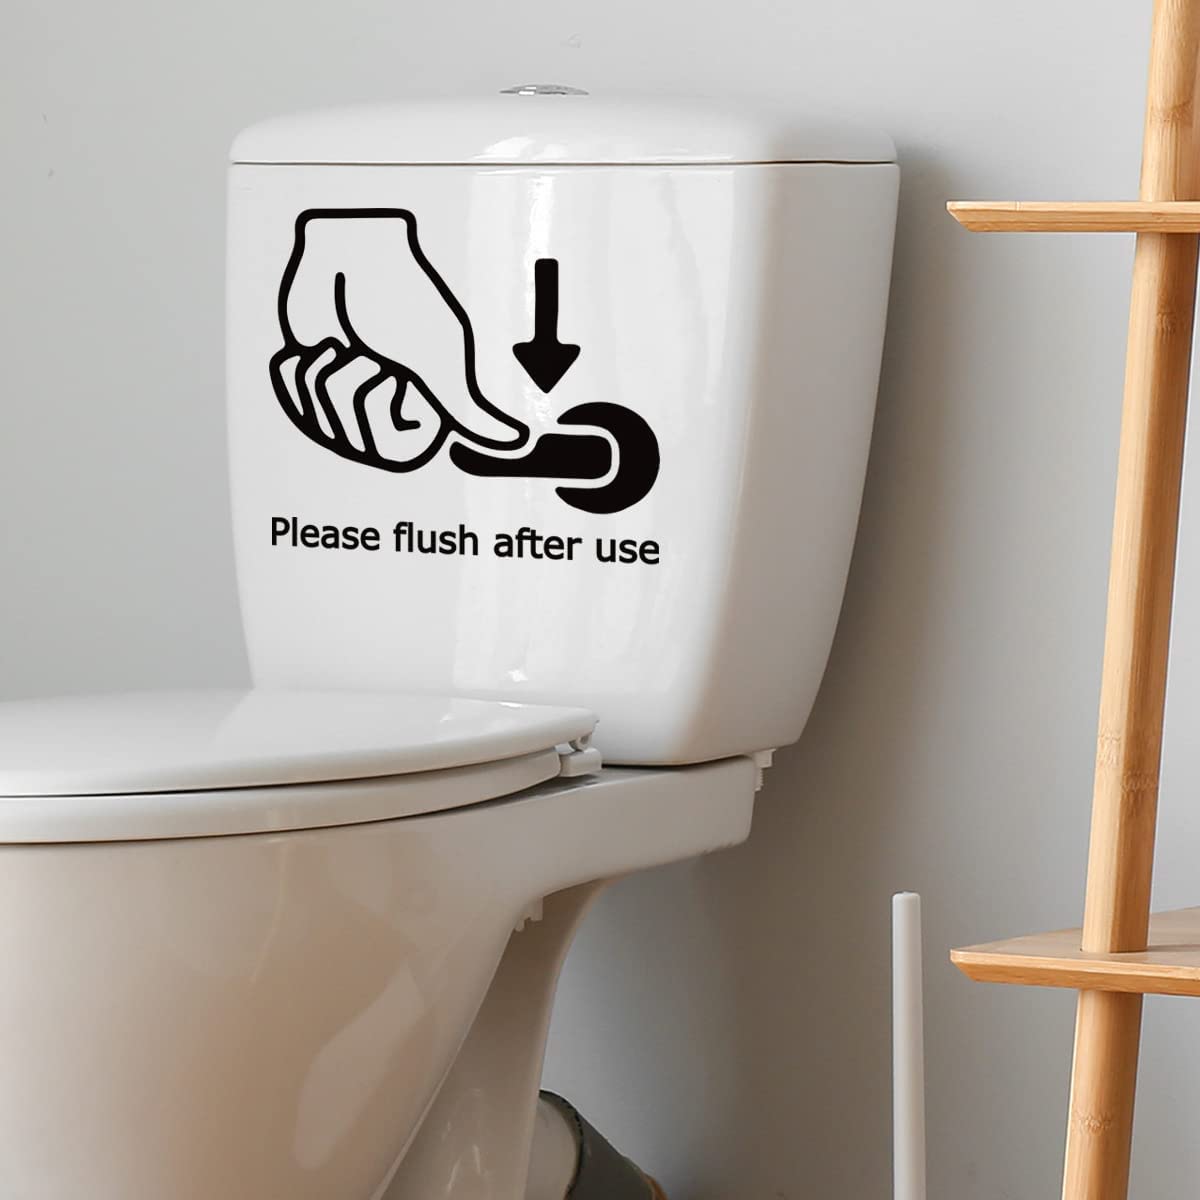 Black hollow toilet seat sticker, (please flush after use)